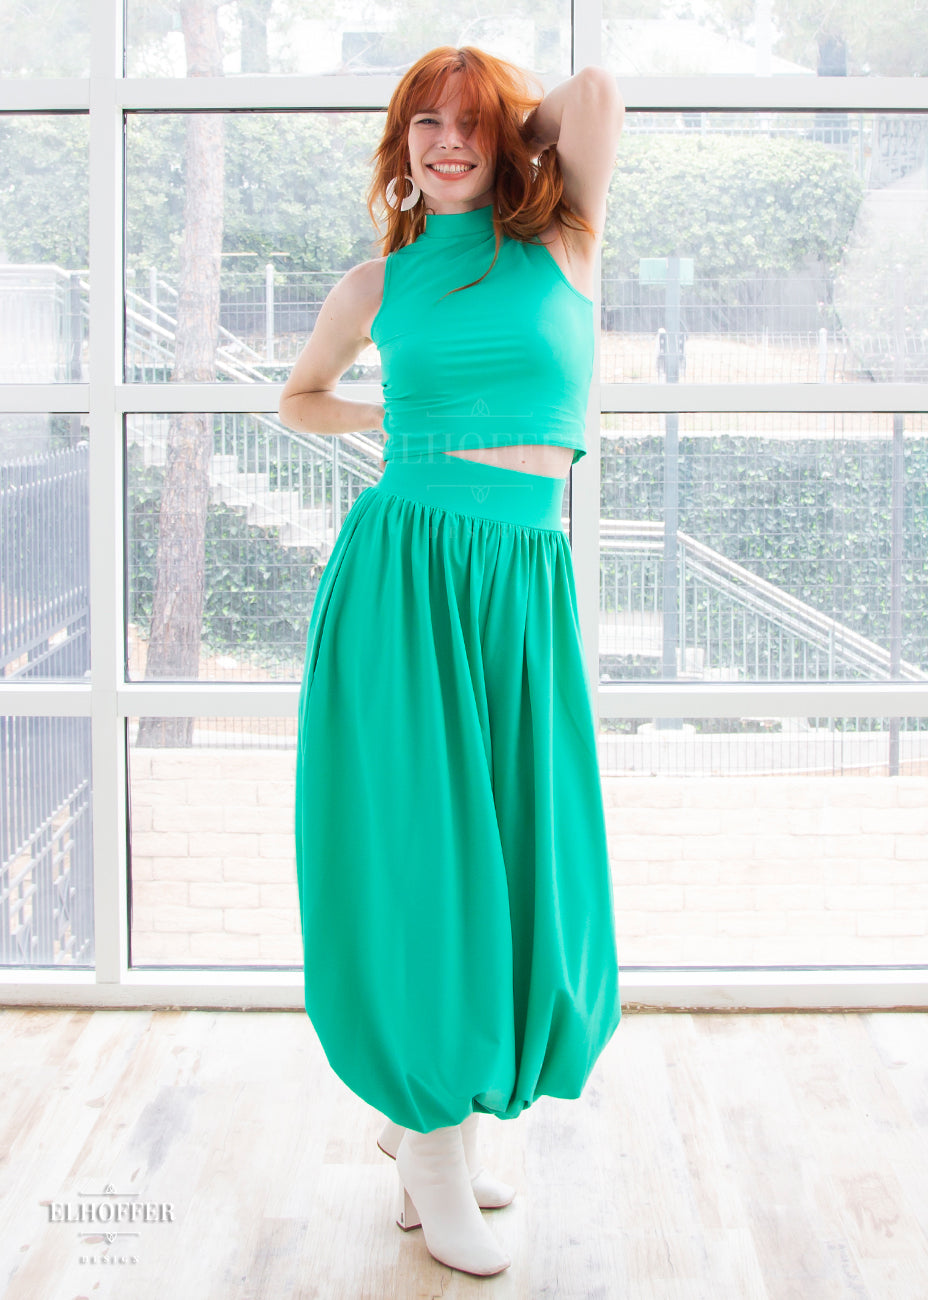 Chloe models the mock turtle neck sleeveless mint green crop top with matching harem style long pants with a fitted waistband and cuffs and flowy fabric.